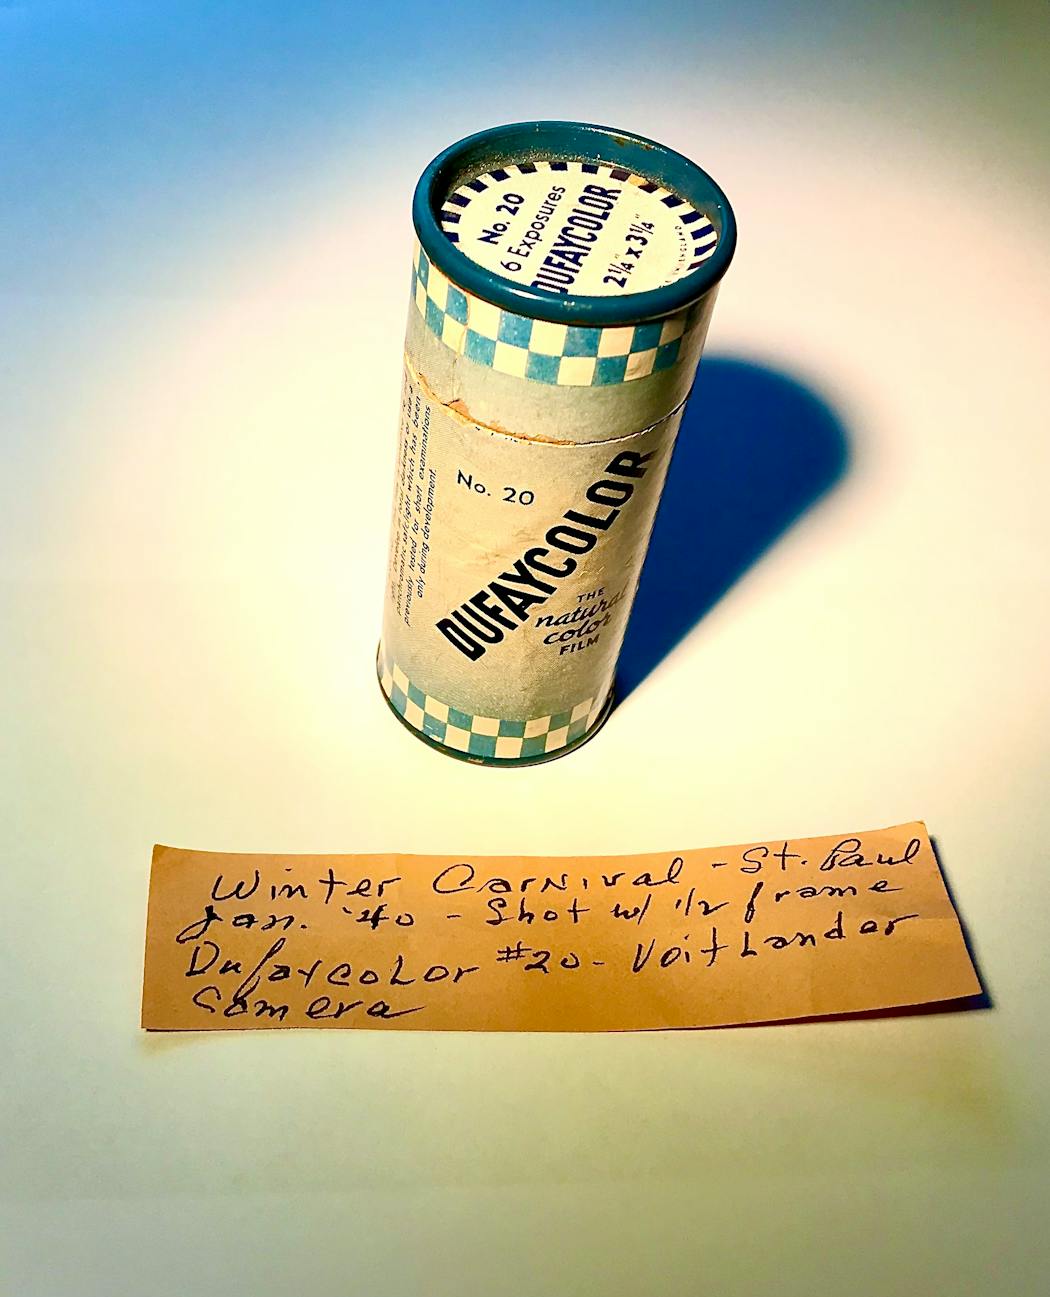 The Dufaycolor film roll shot by William Snell and his handwritten note. 